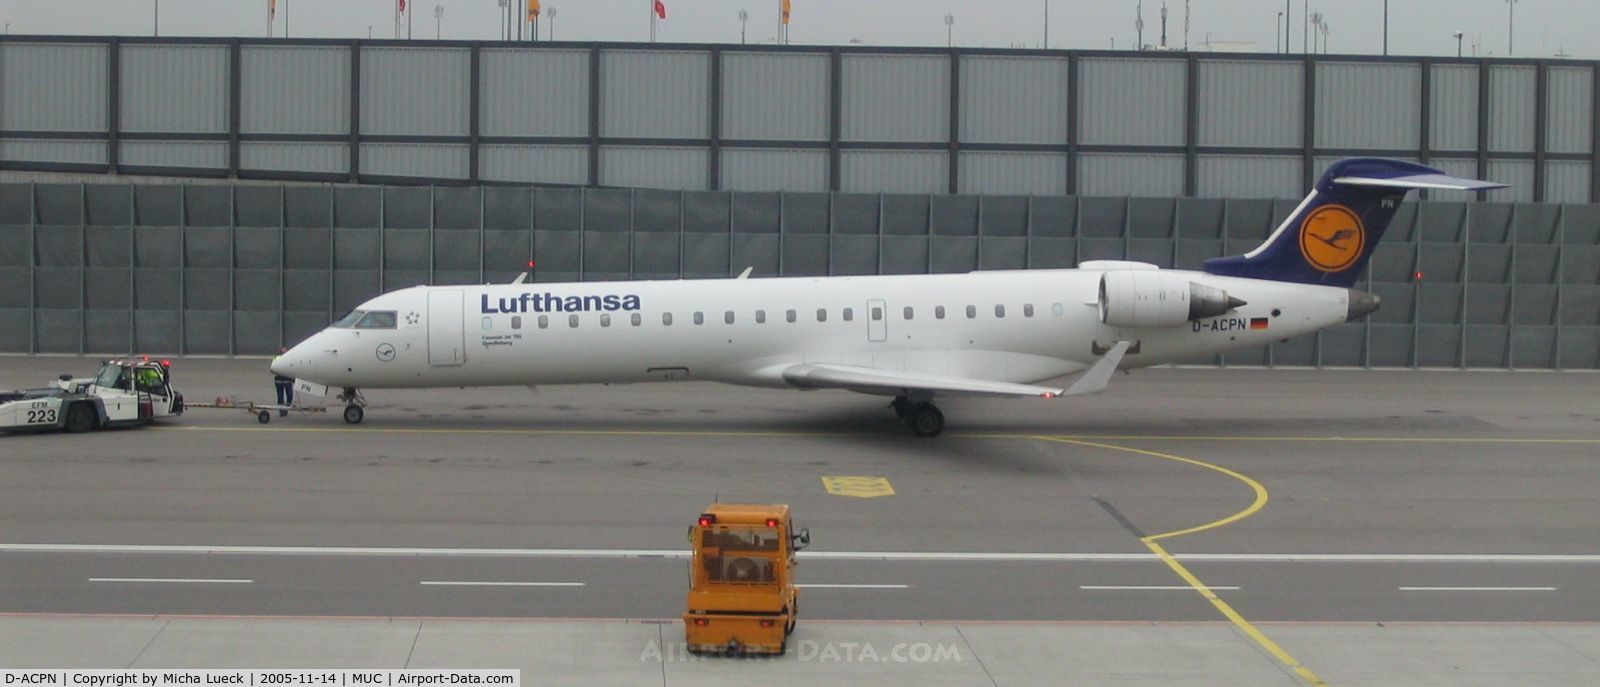 D-ACPN, 2003 Bombardier CRJ-701ER (CL-600-2C10) Regional Jet C/N 10083, Lufthansa Cityline and Team Lufthansa operate a large number of Canadair Regional Jets